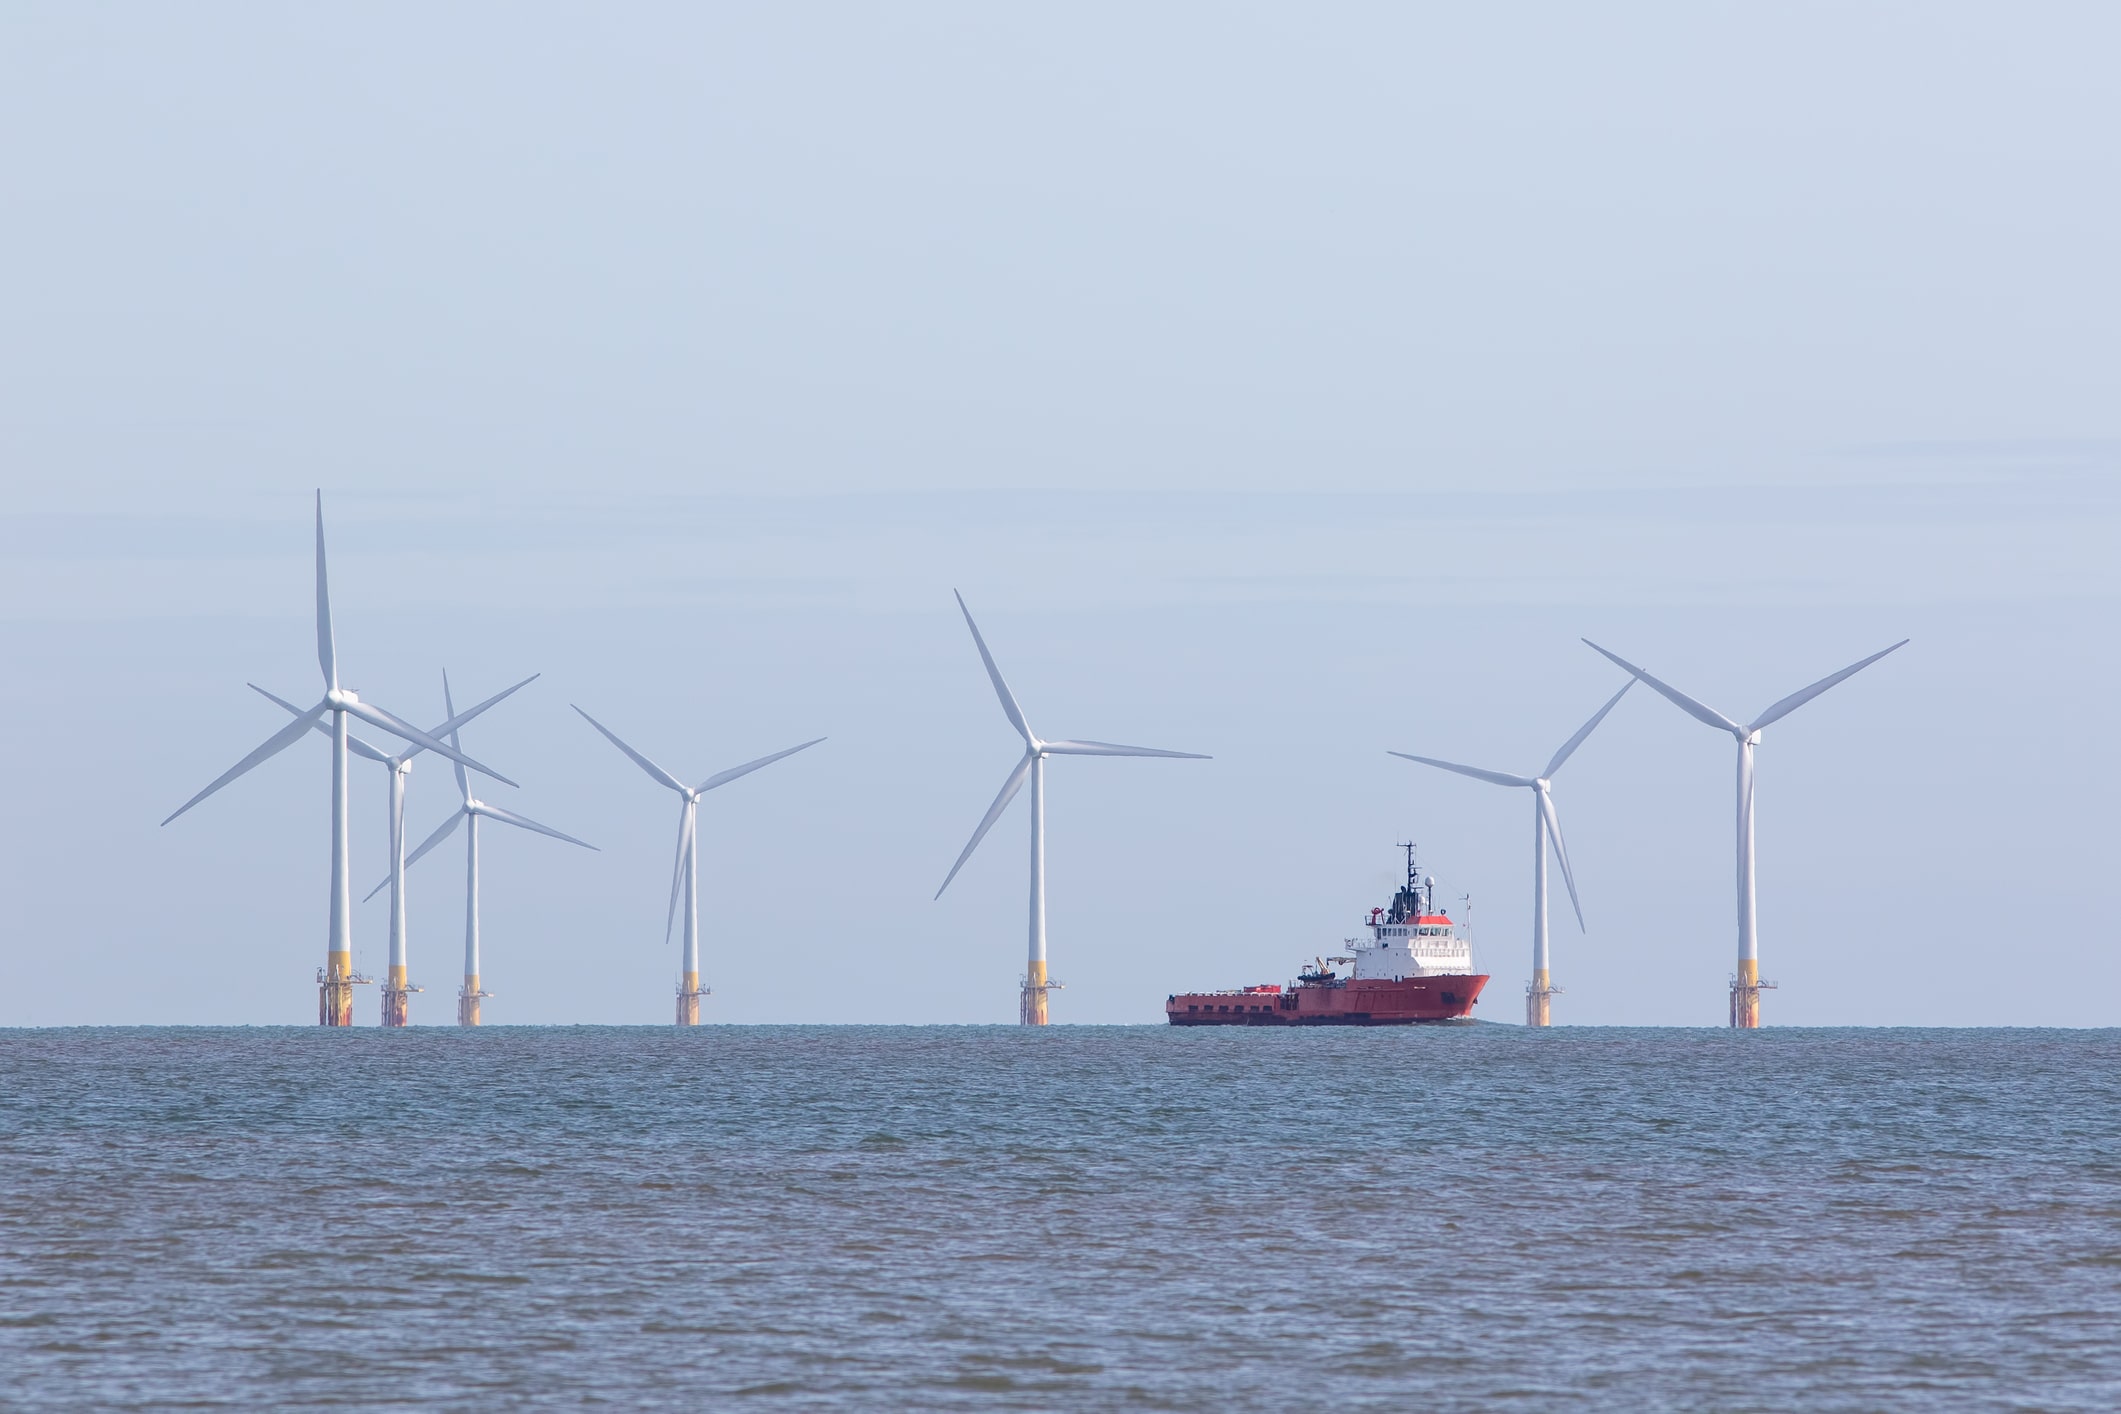 U.S. Market for Offshore Wind Farms is Primed for Growth: Health and Safety Learnings from the U.K.